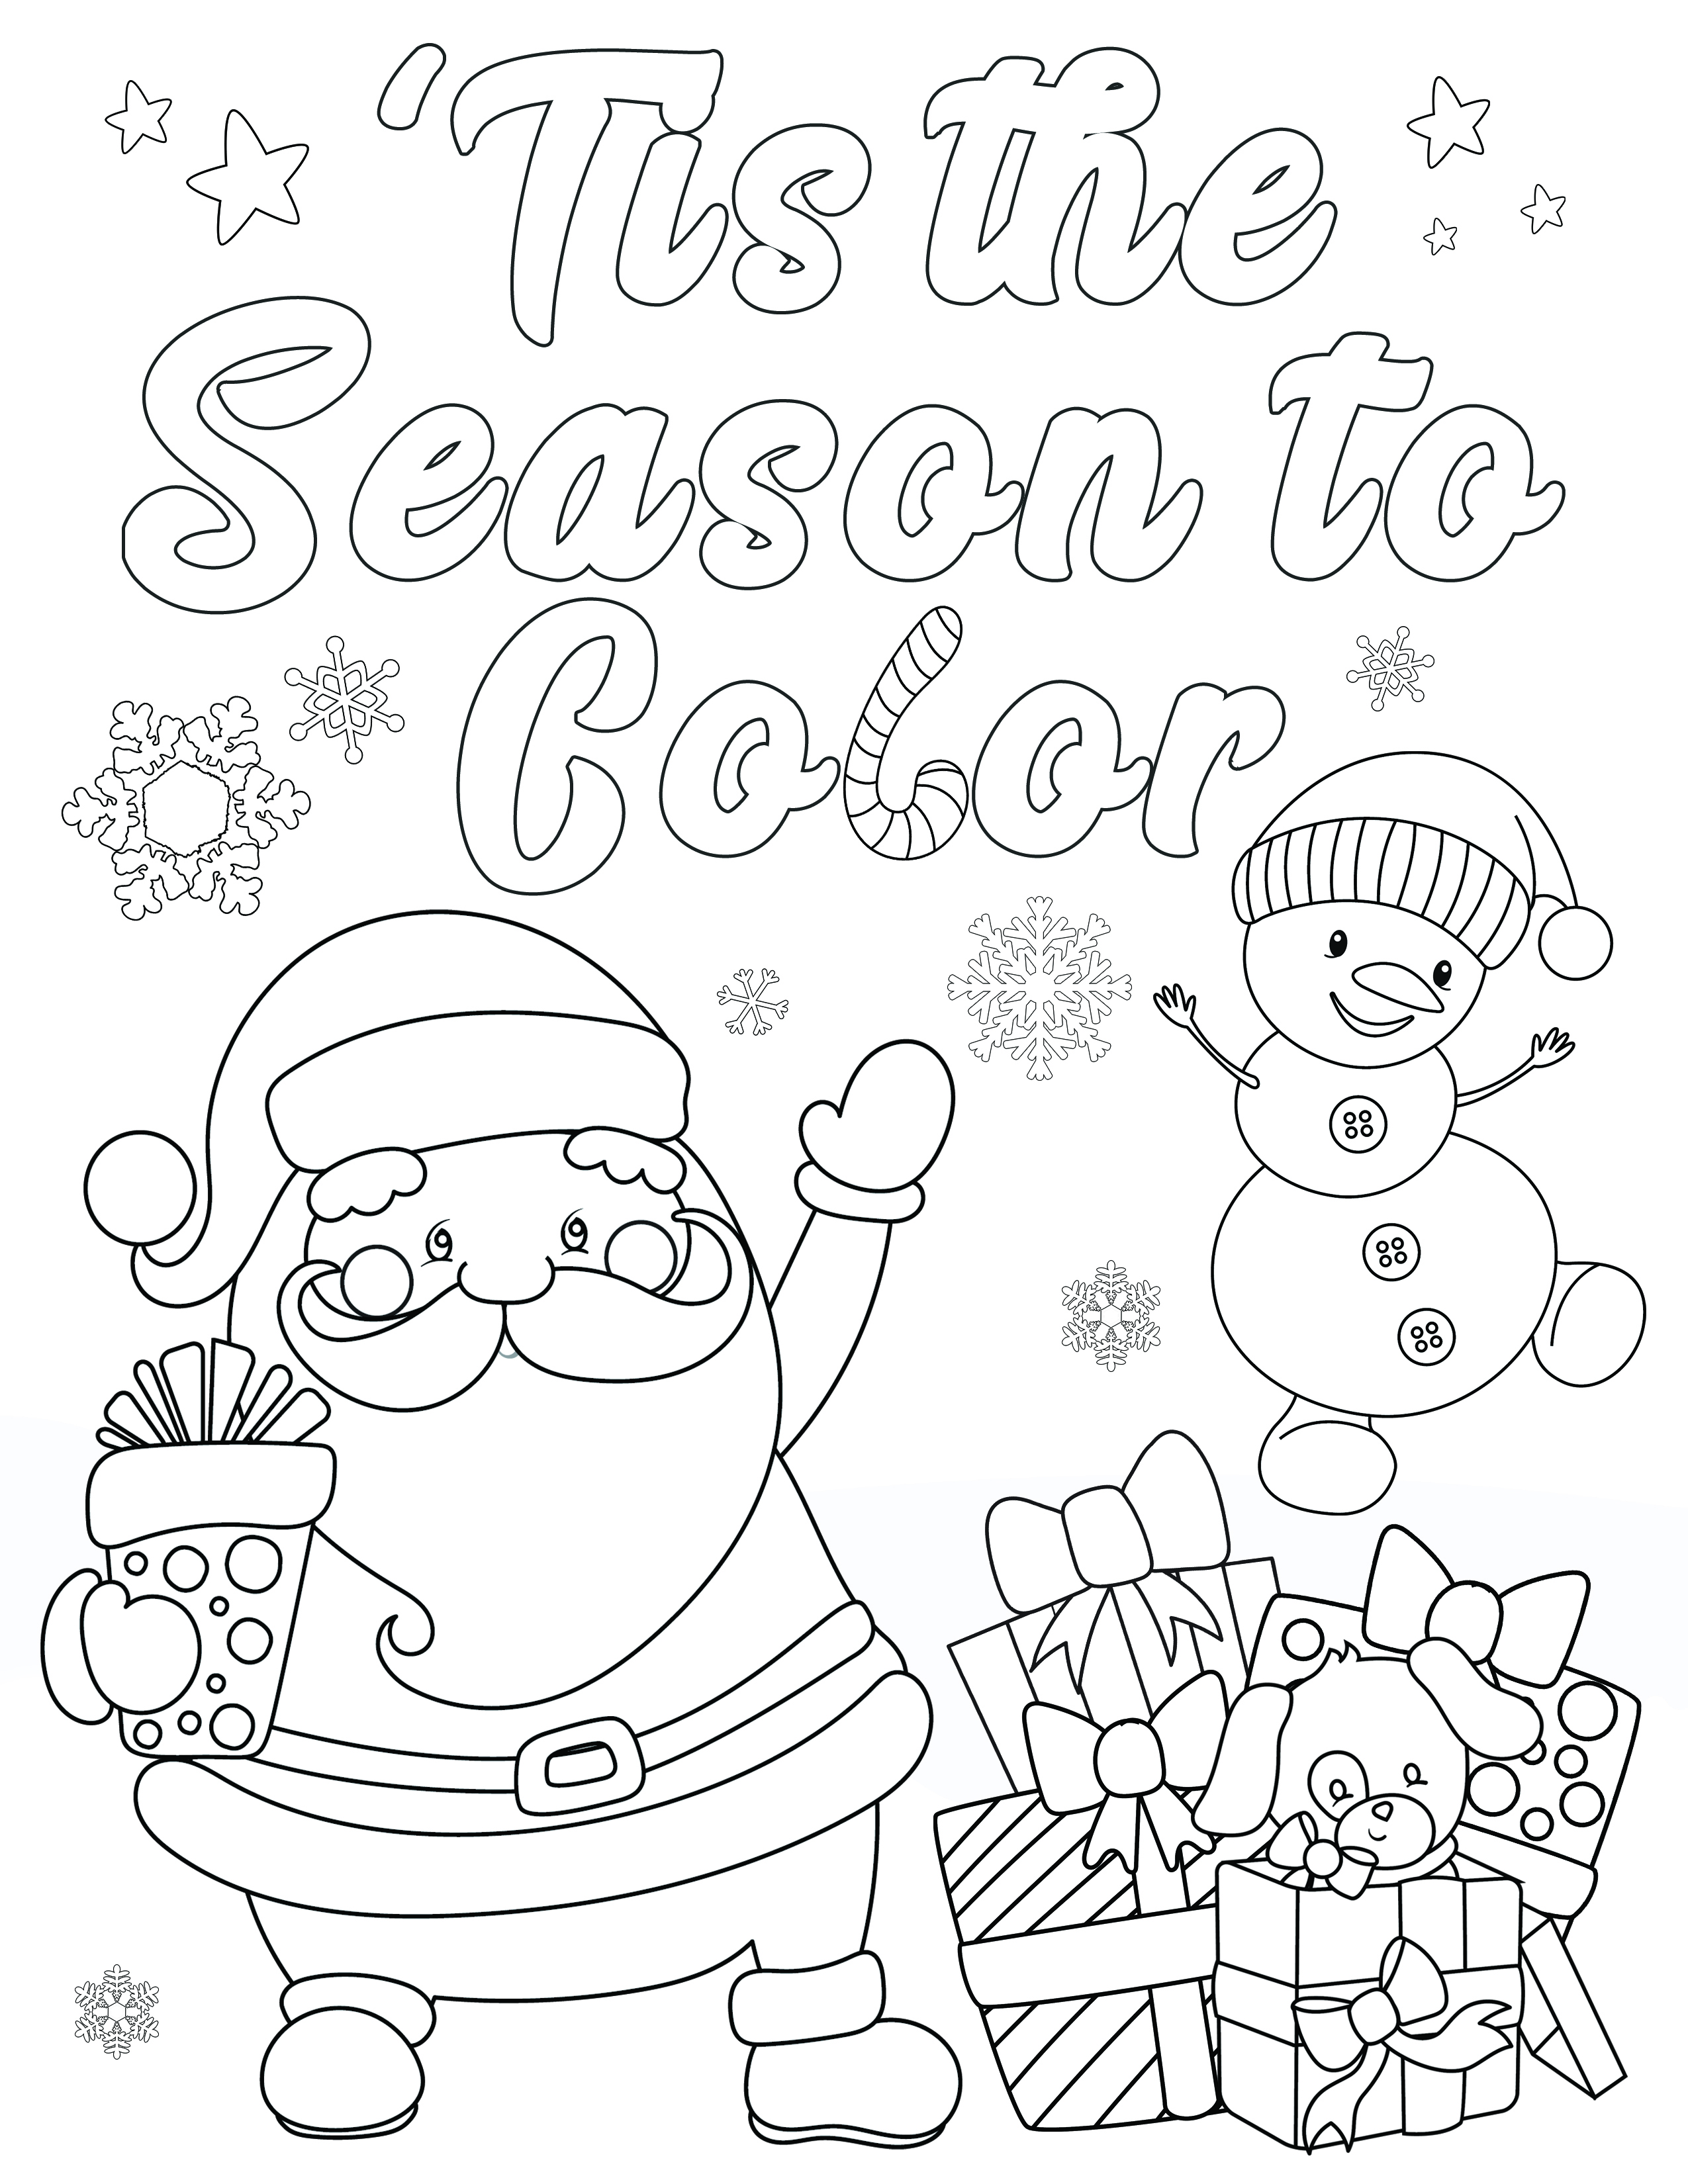 FREE Christmas Coloring Pages For Adults And Kids Happiness Is Homemade